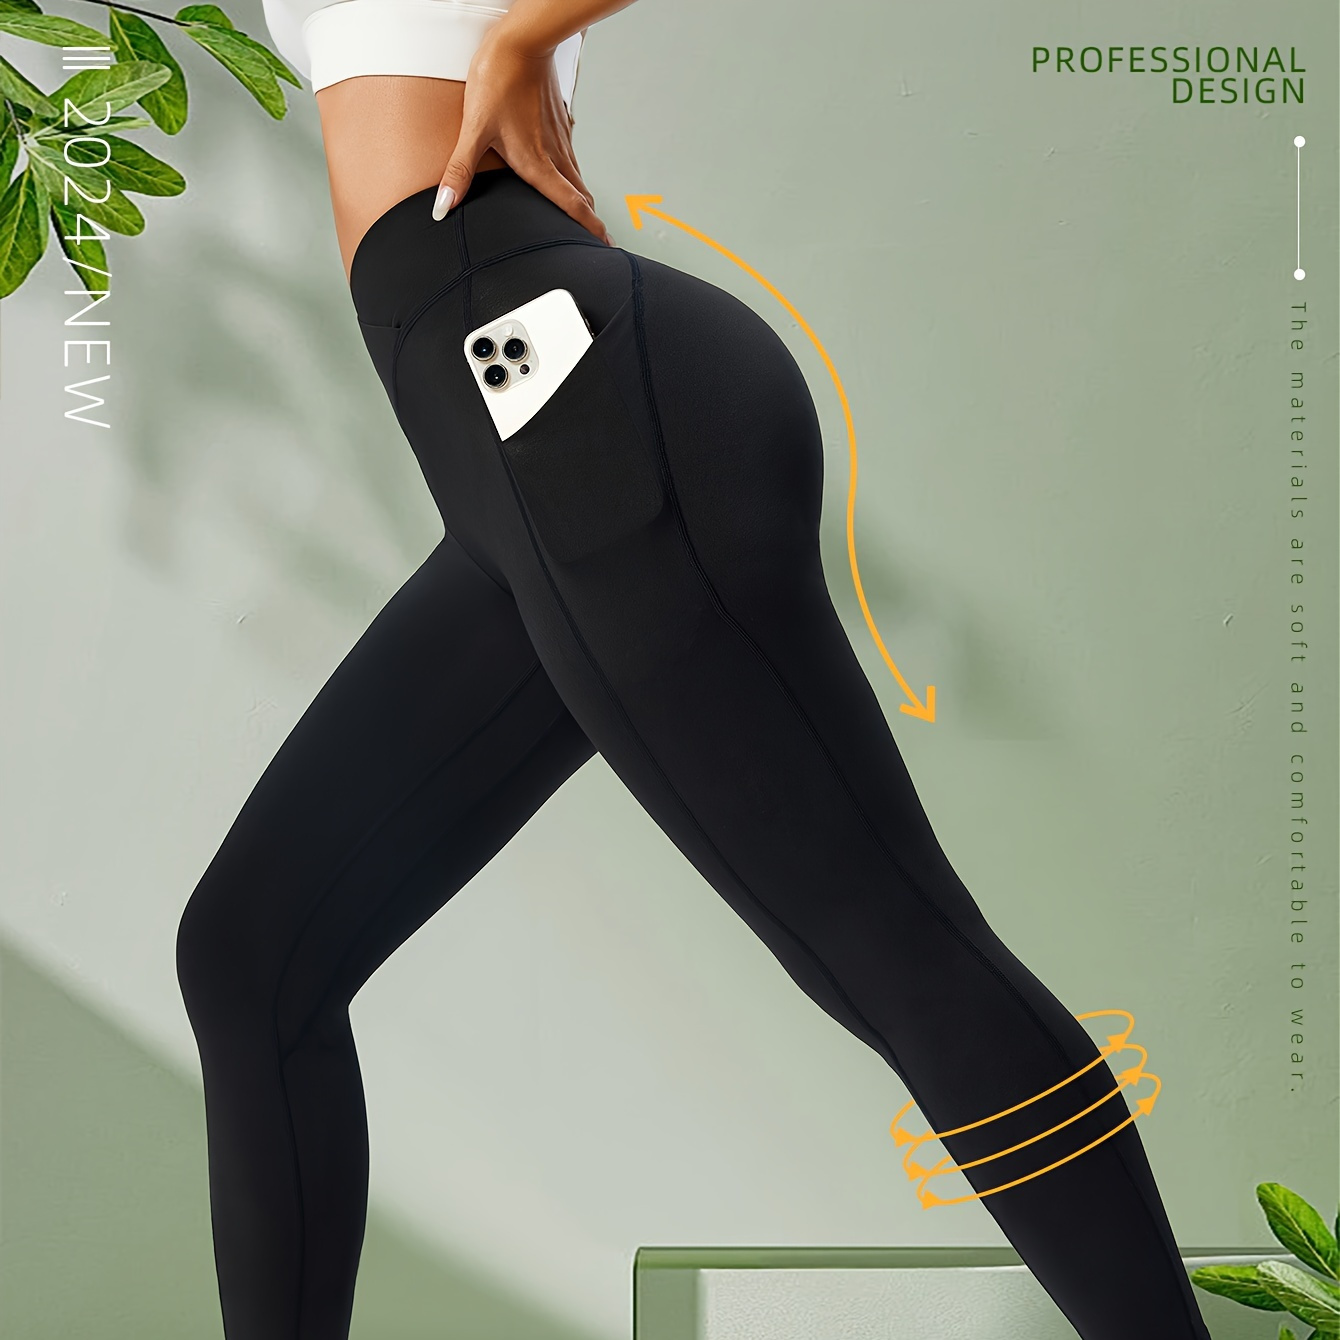 

Women's High-waisted Butt Lift Yoga Leggings - Soft, Stretchy Athletic Tights With Pockets For Running And Workout